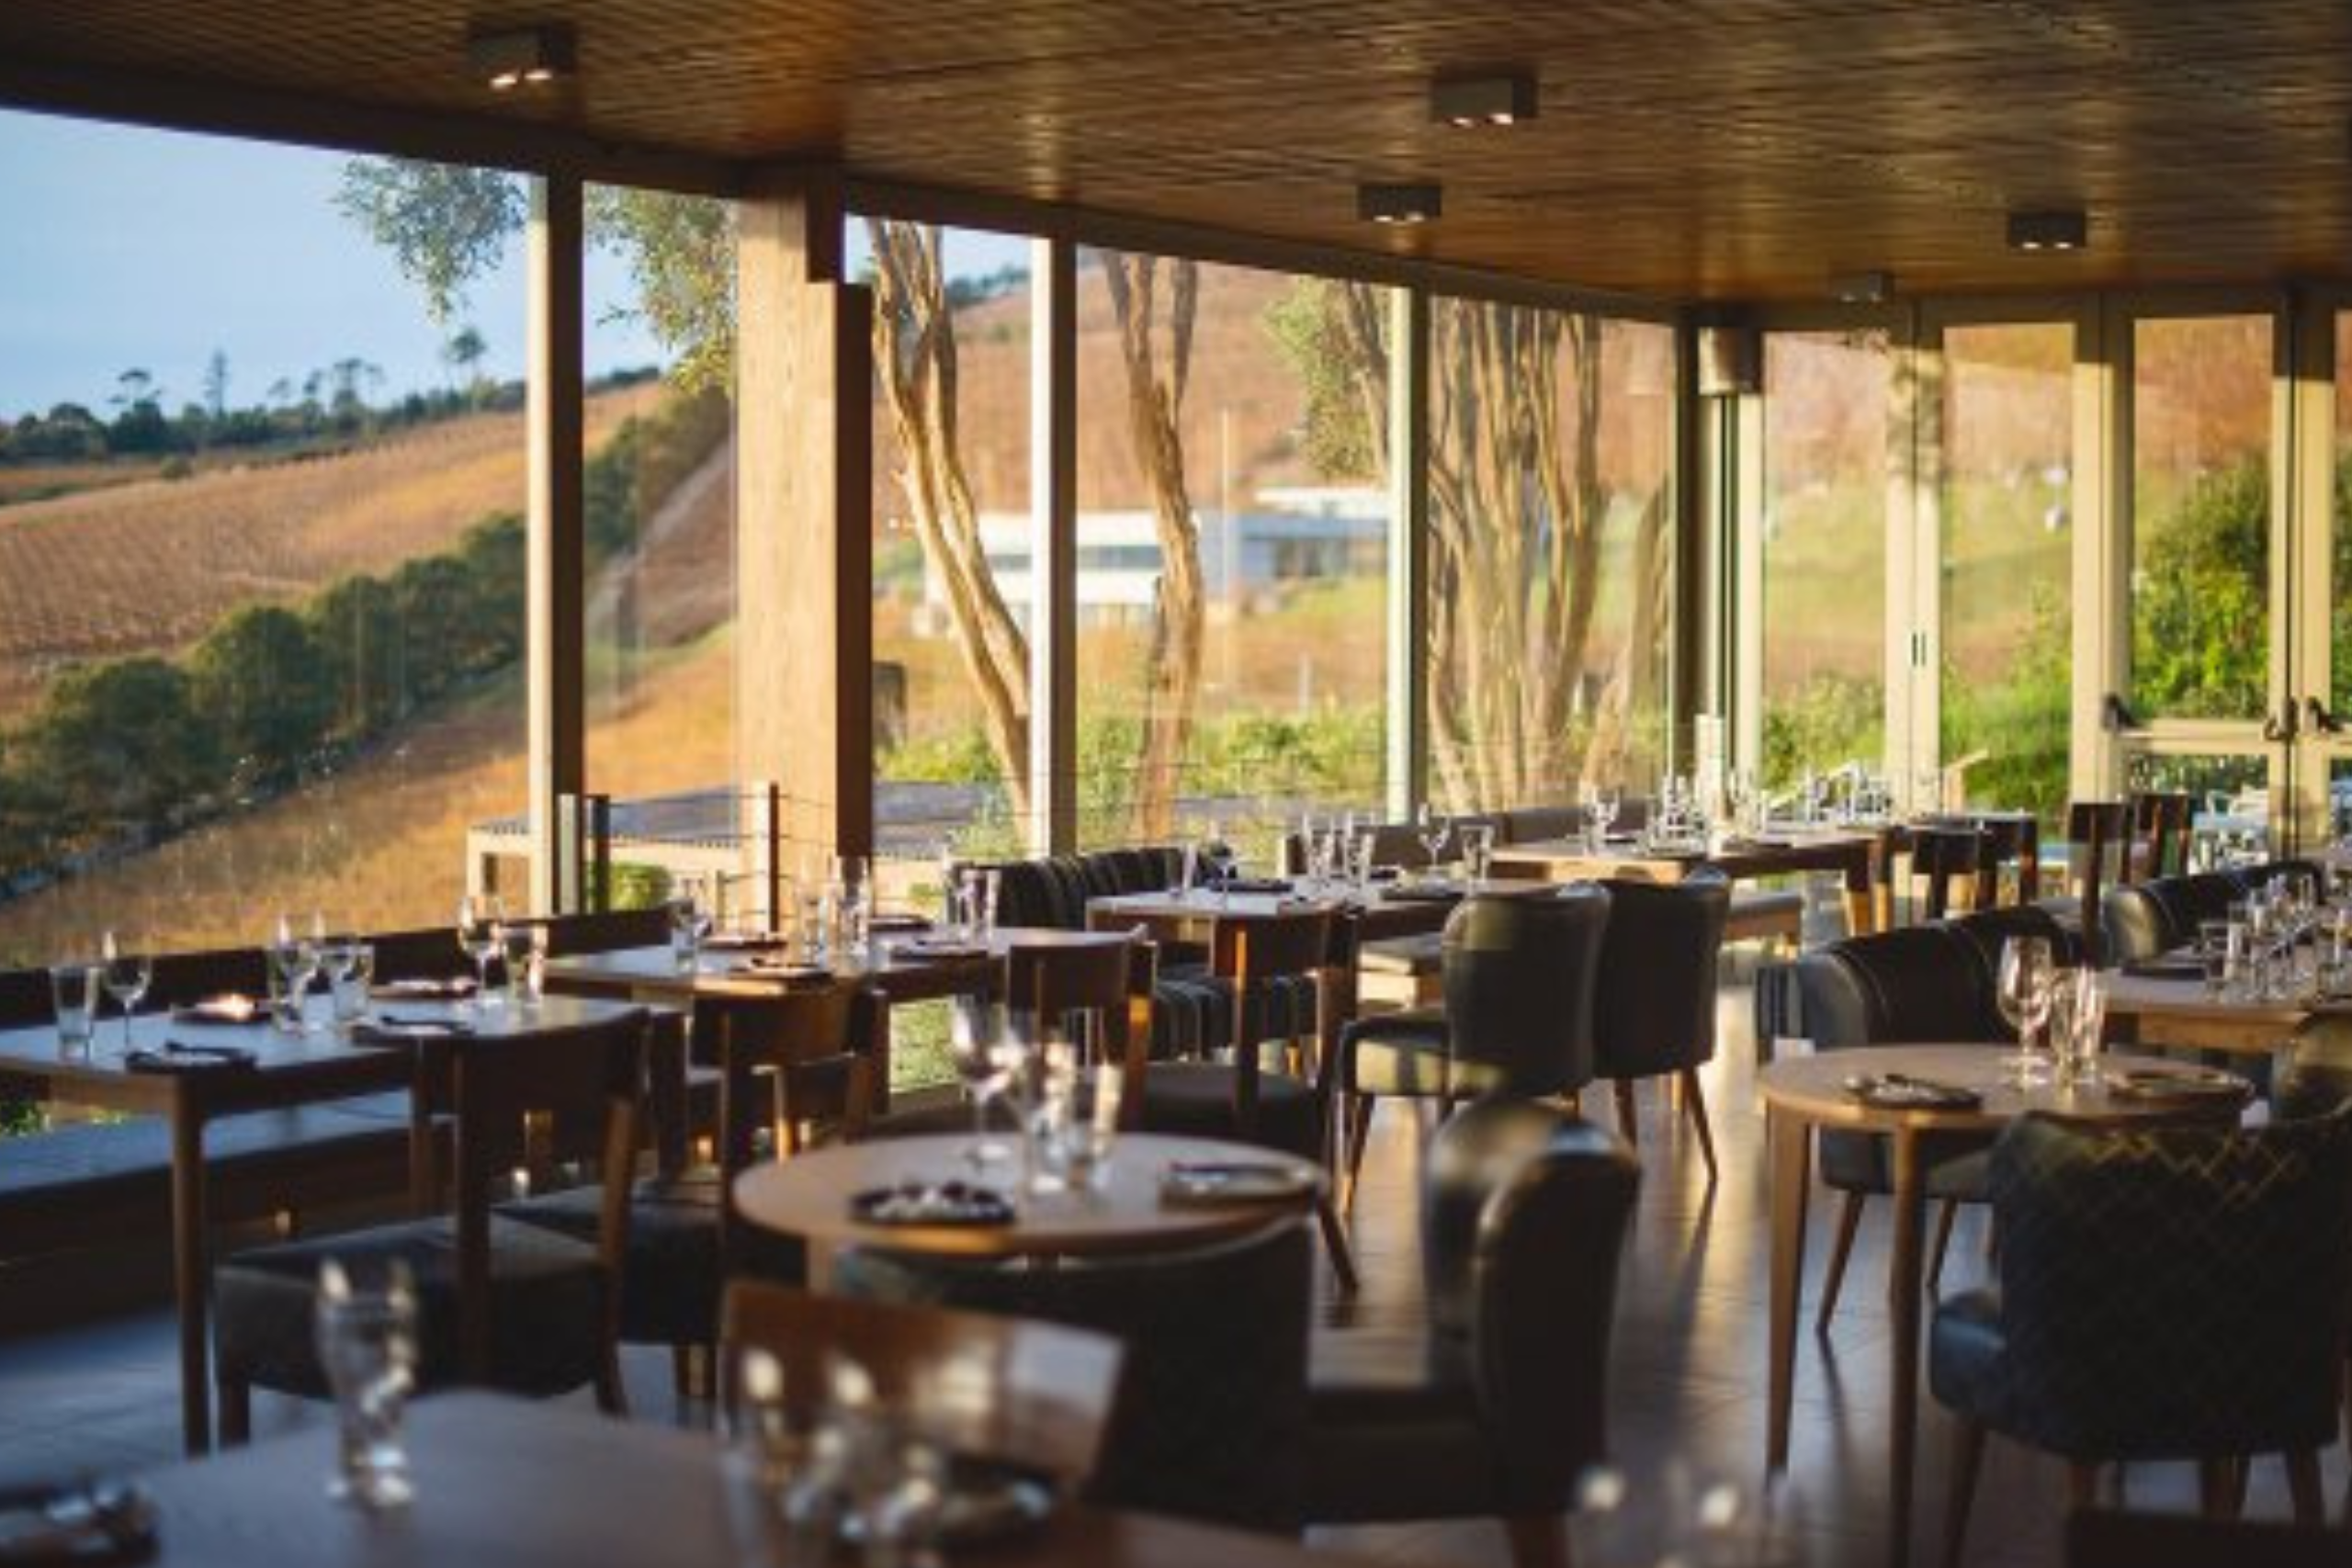 Chef's Warehouse at Beau Constantia